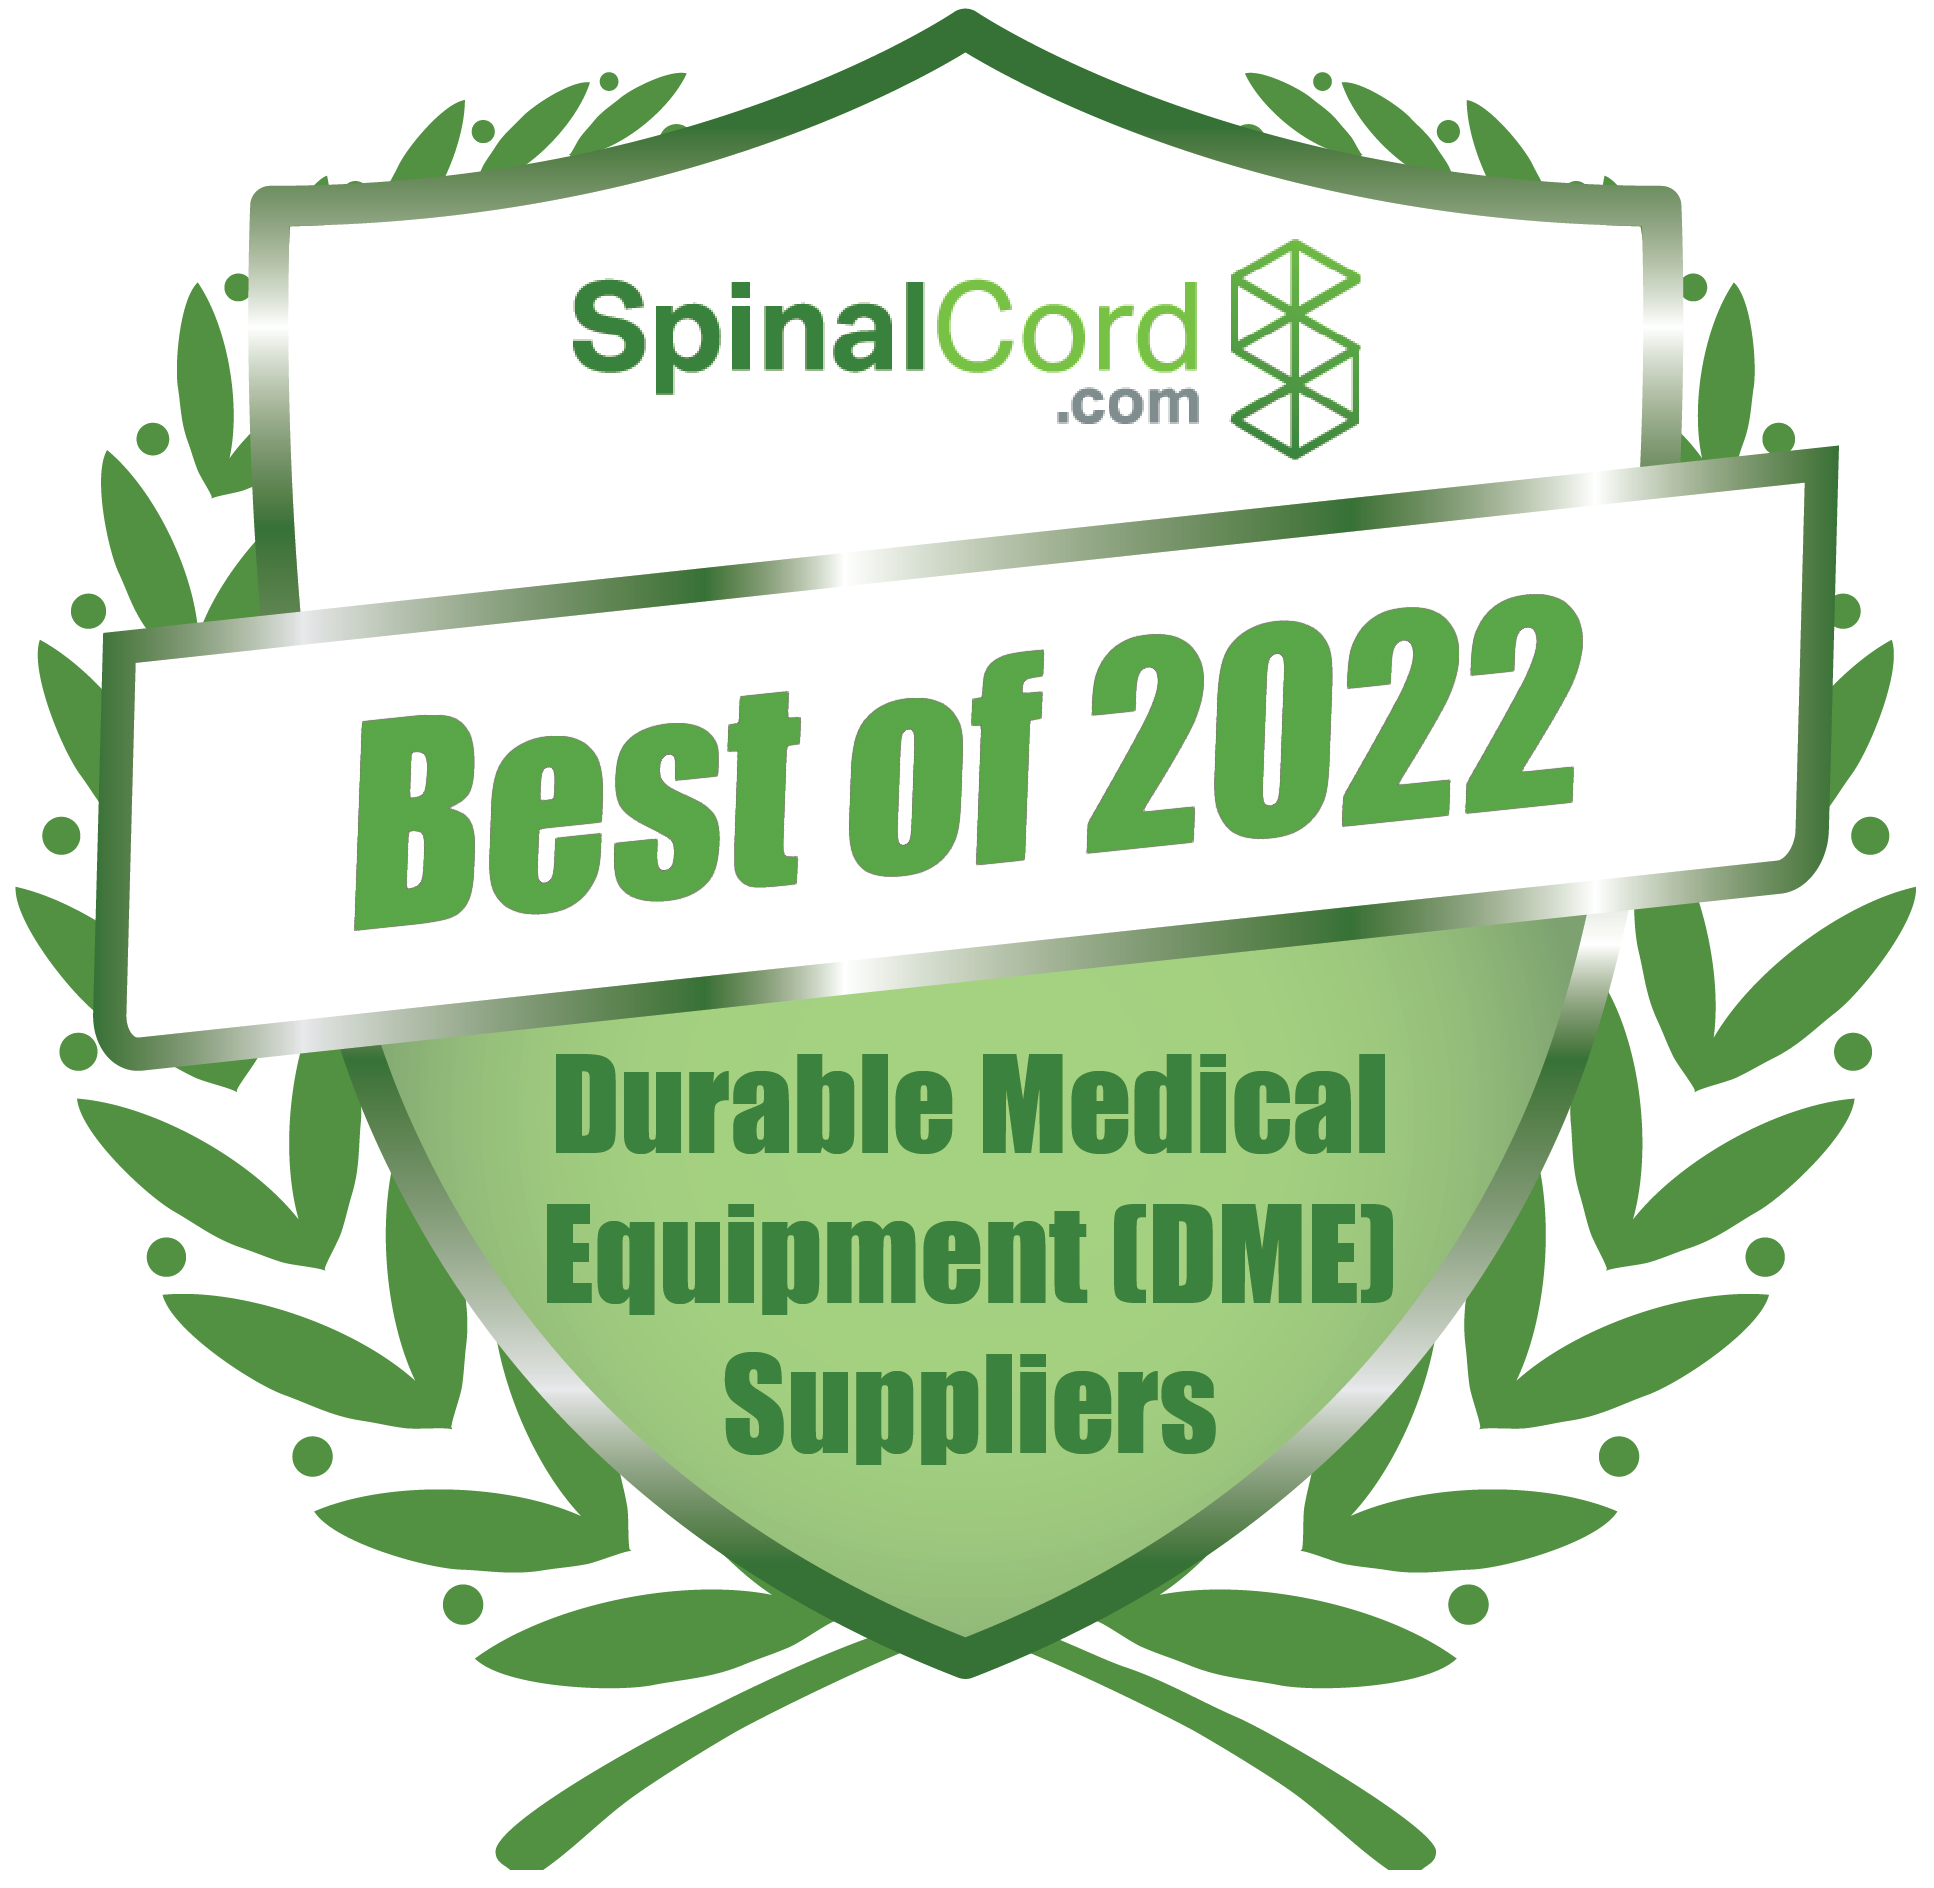 Spinalcord.com Best of Awards Durable Medical Equipment (DME) Suppliers